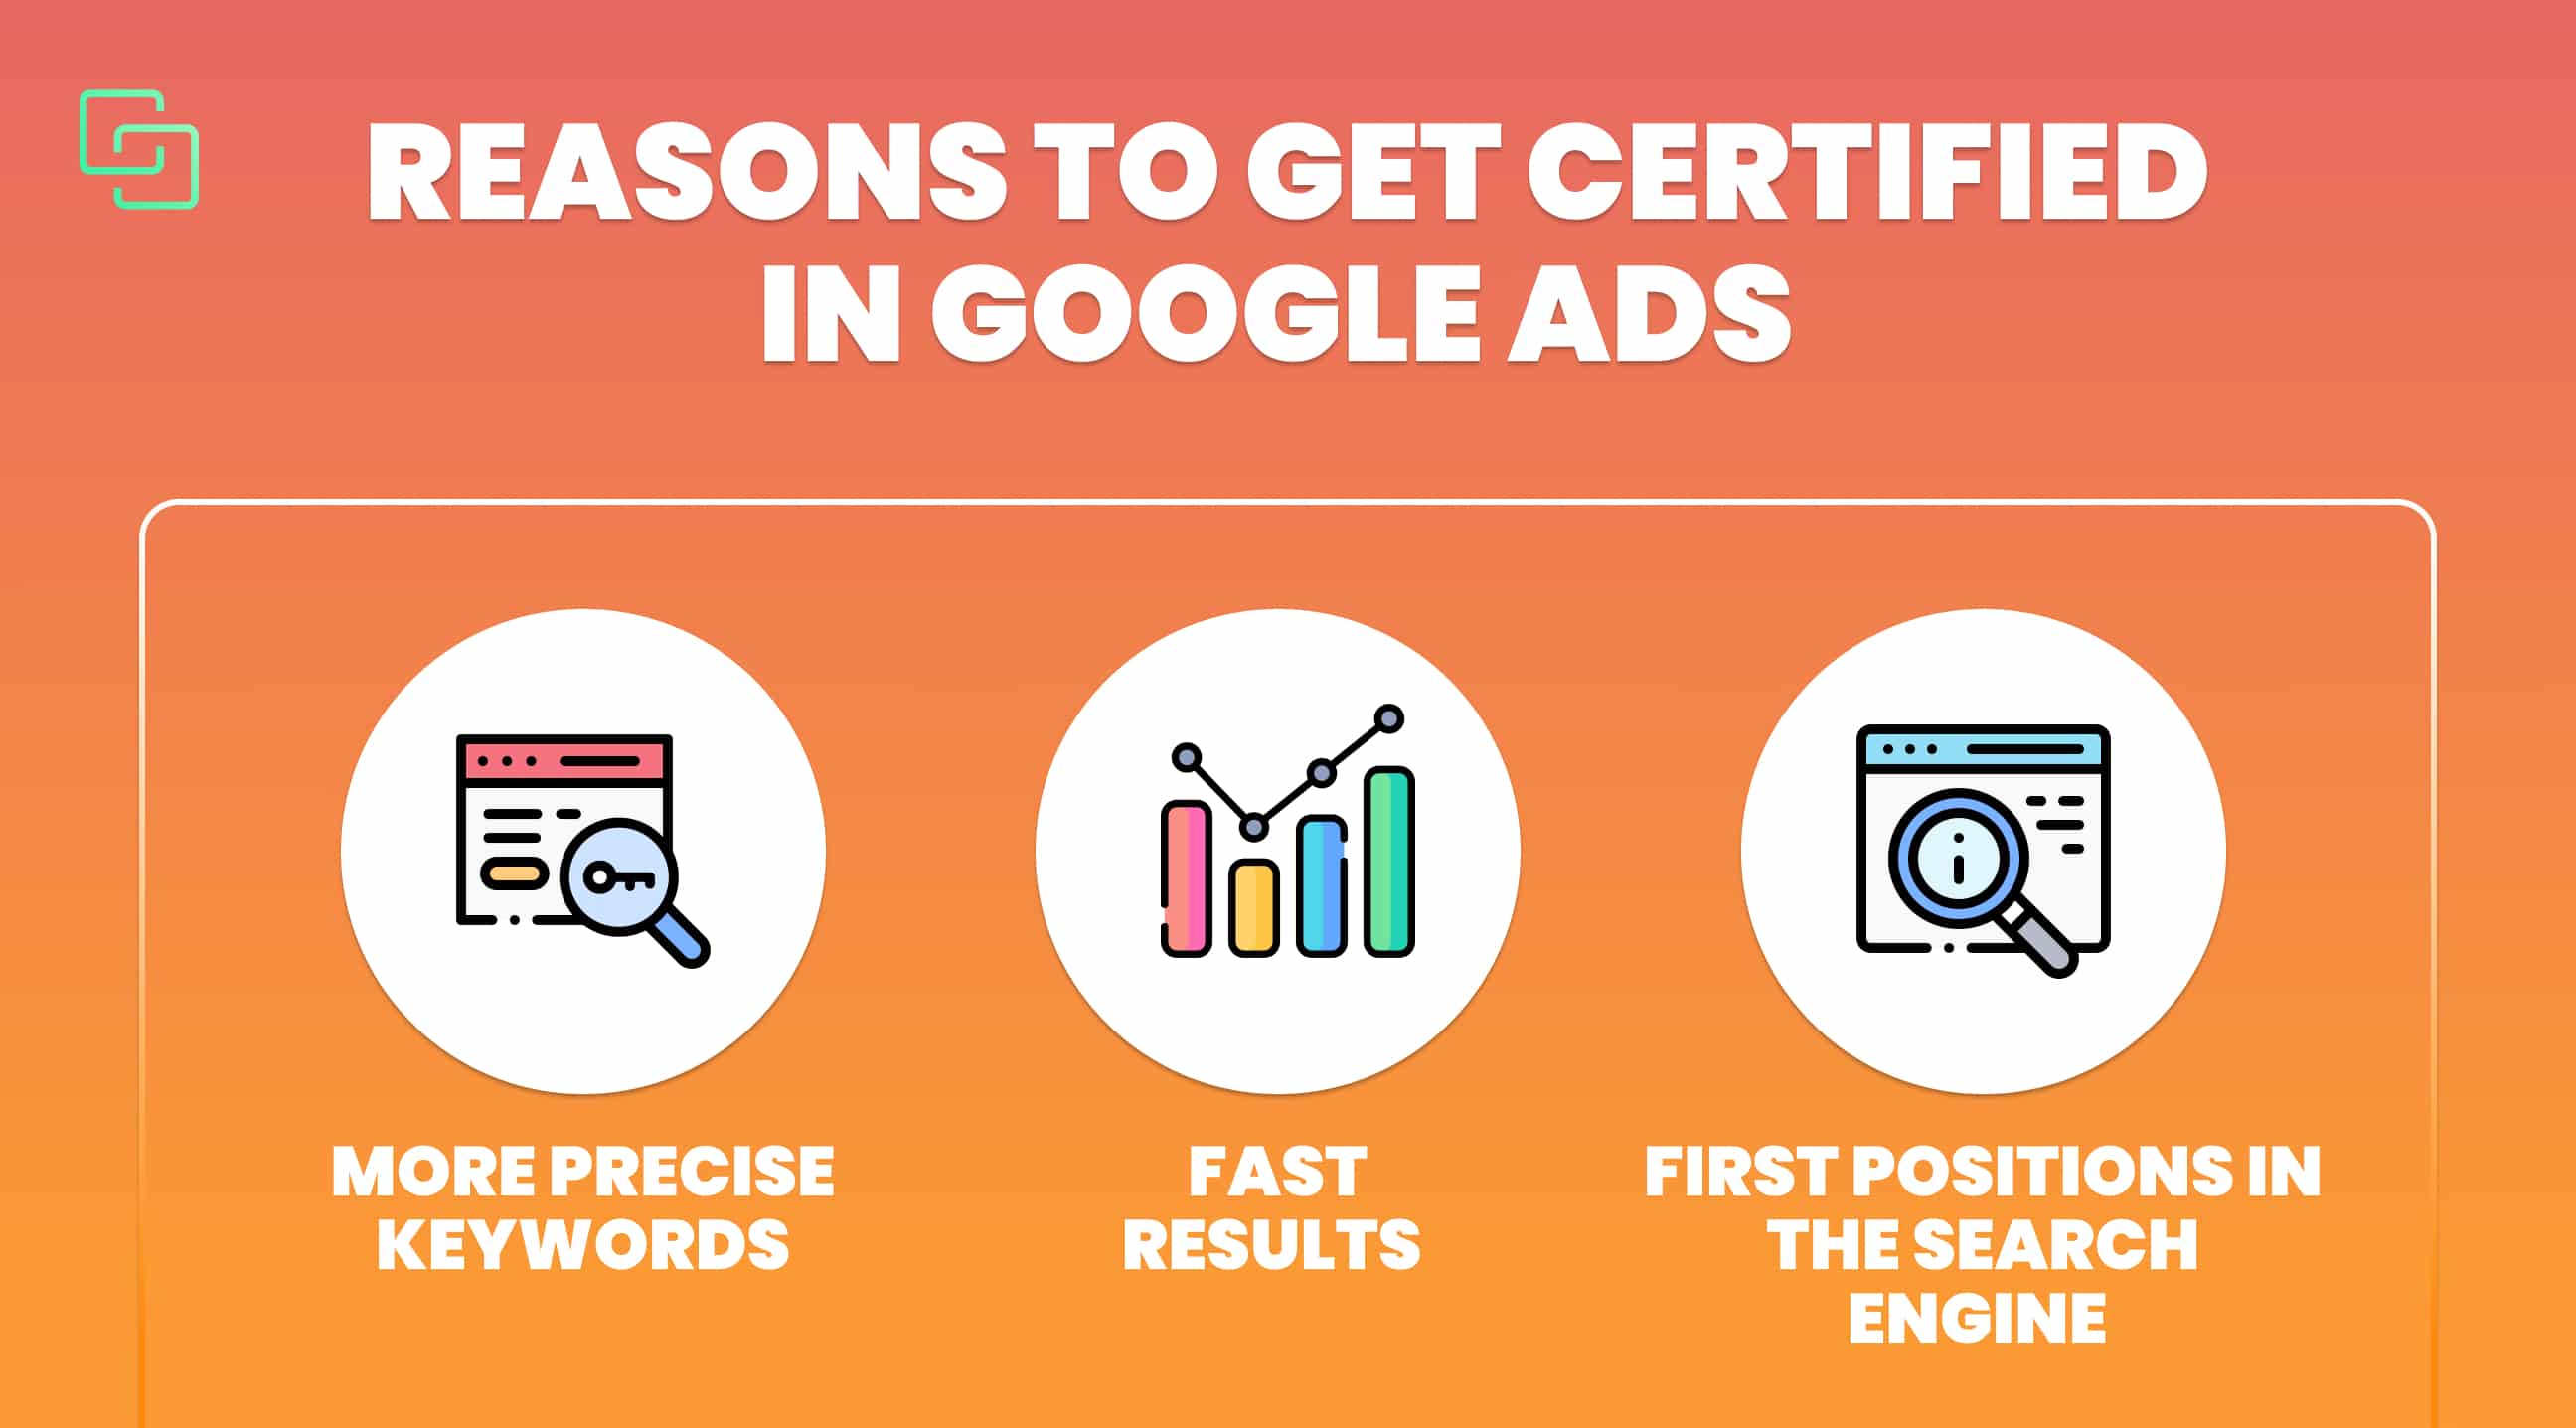 Google Ads Certification Learn how to get certified (2022)